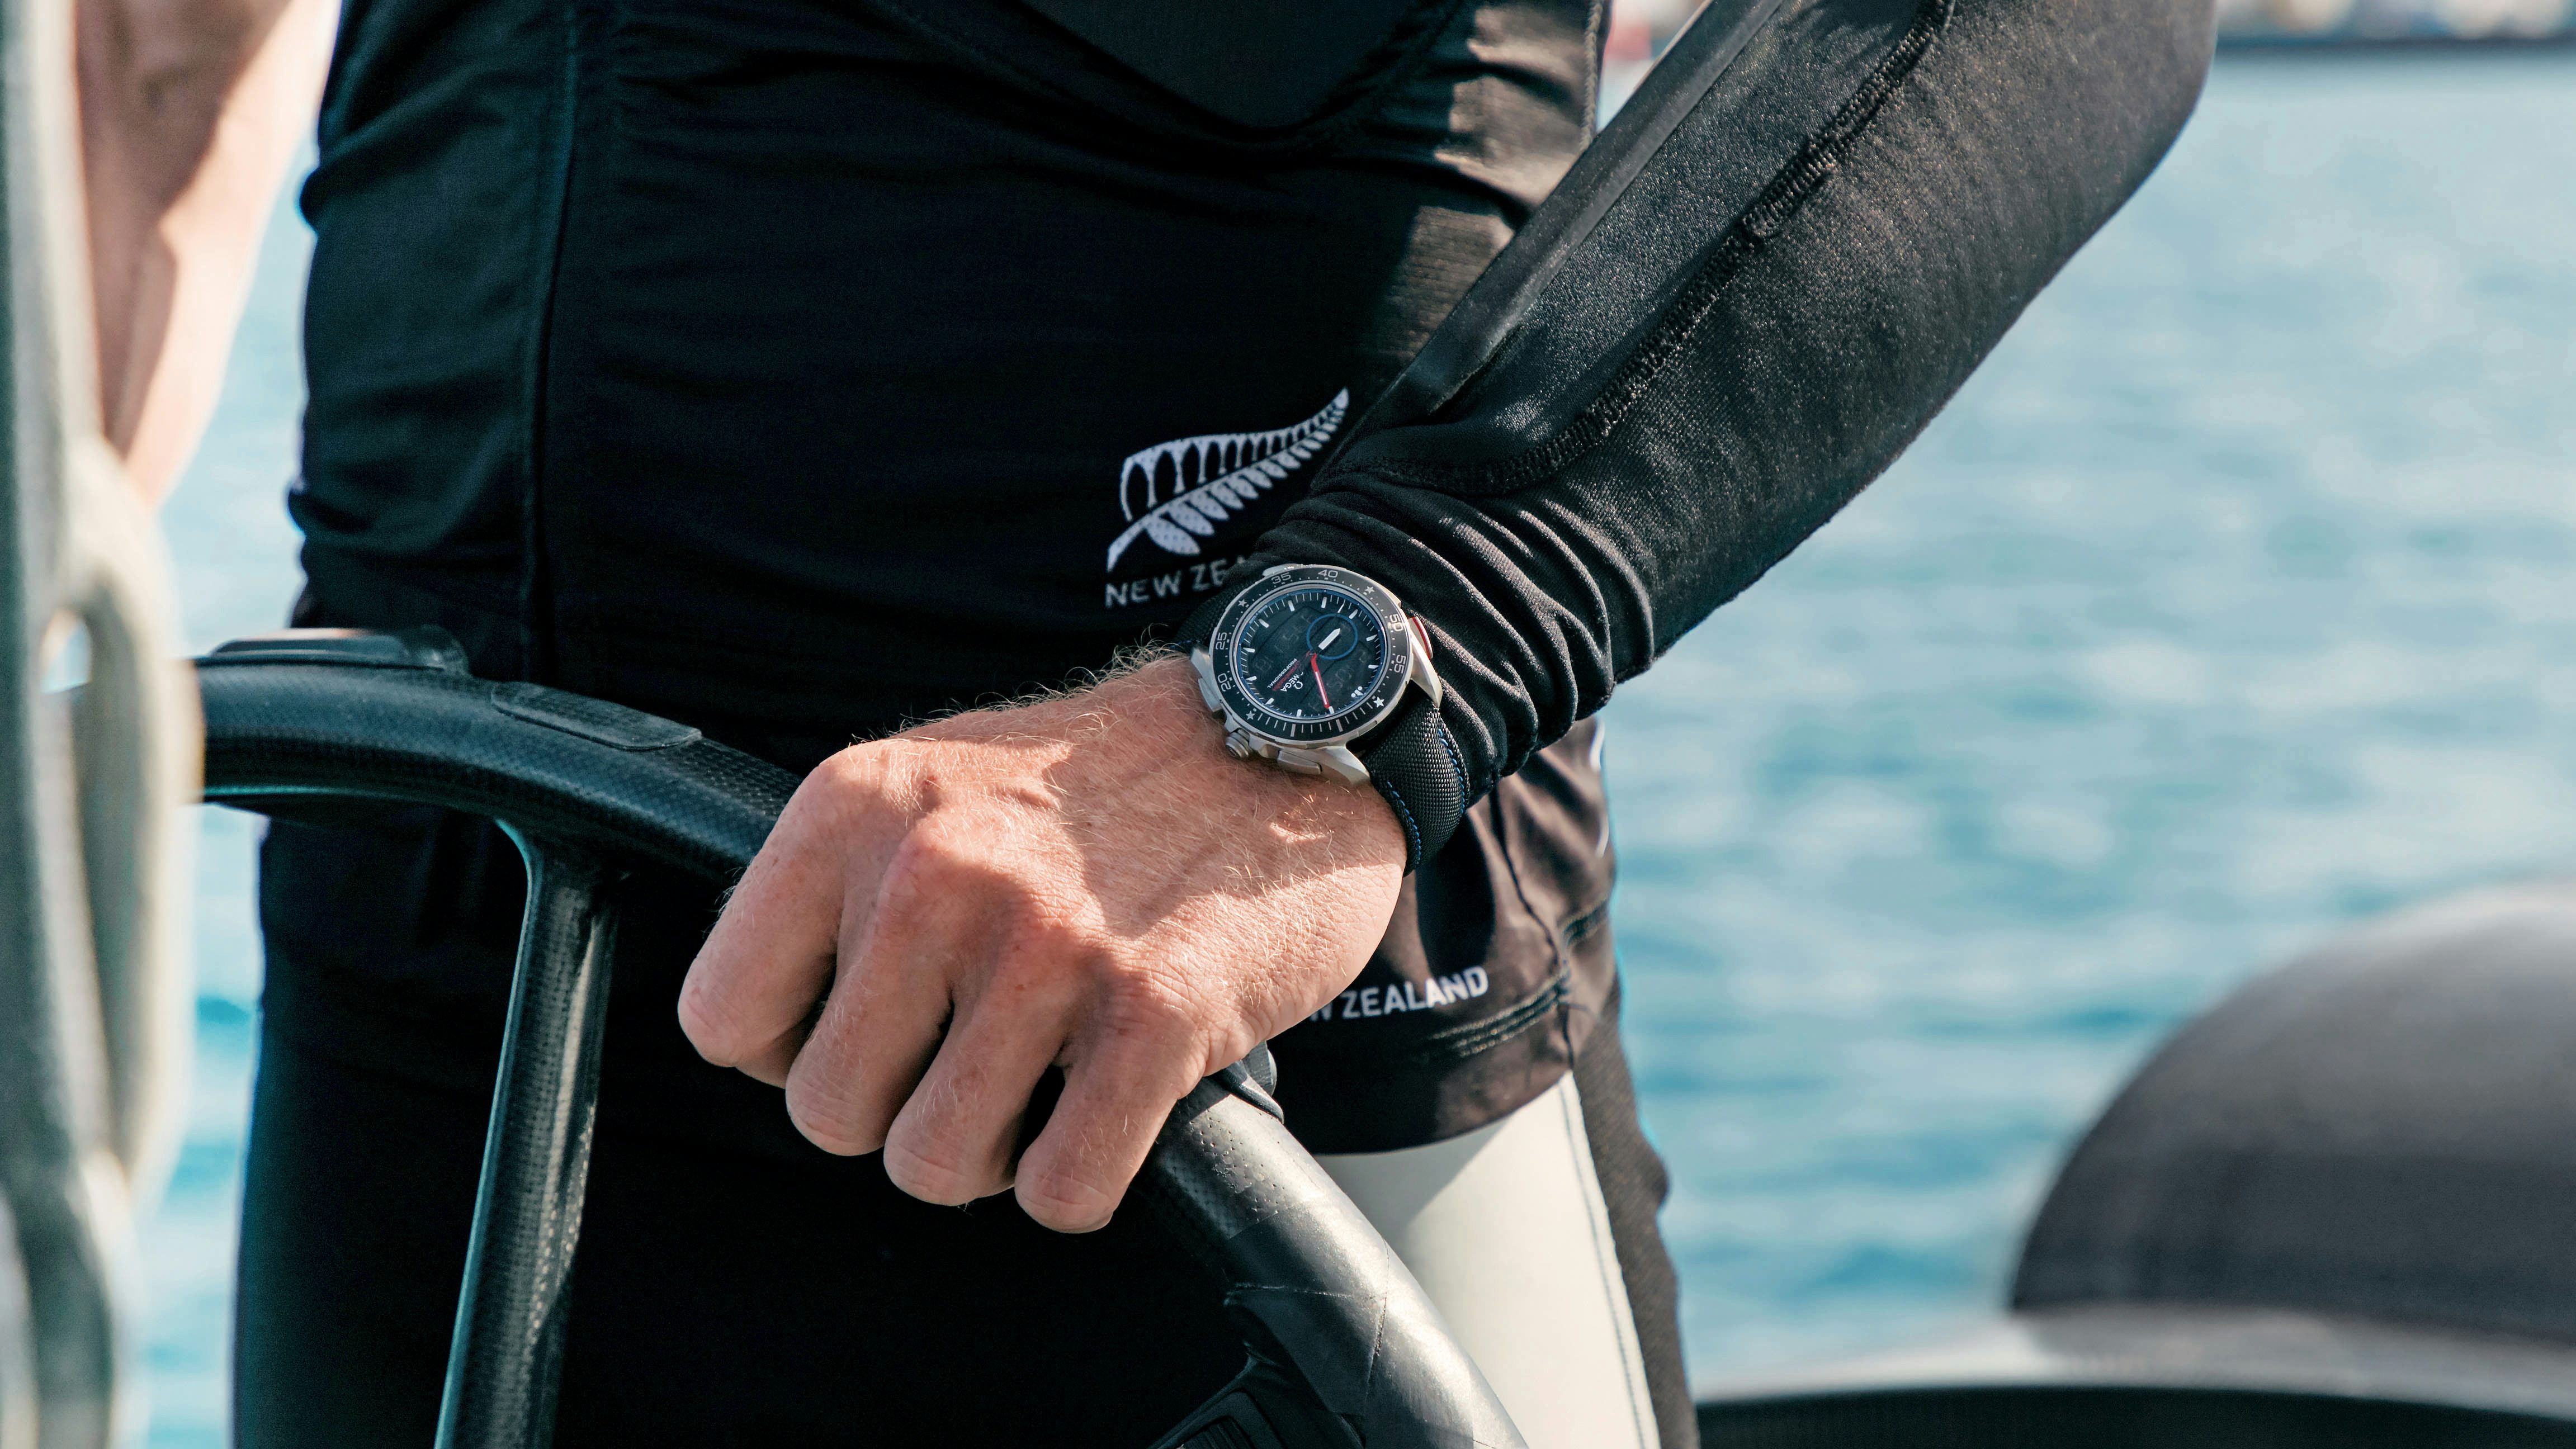 Bremont launches America's Cup watch collection